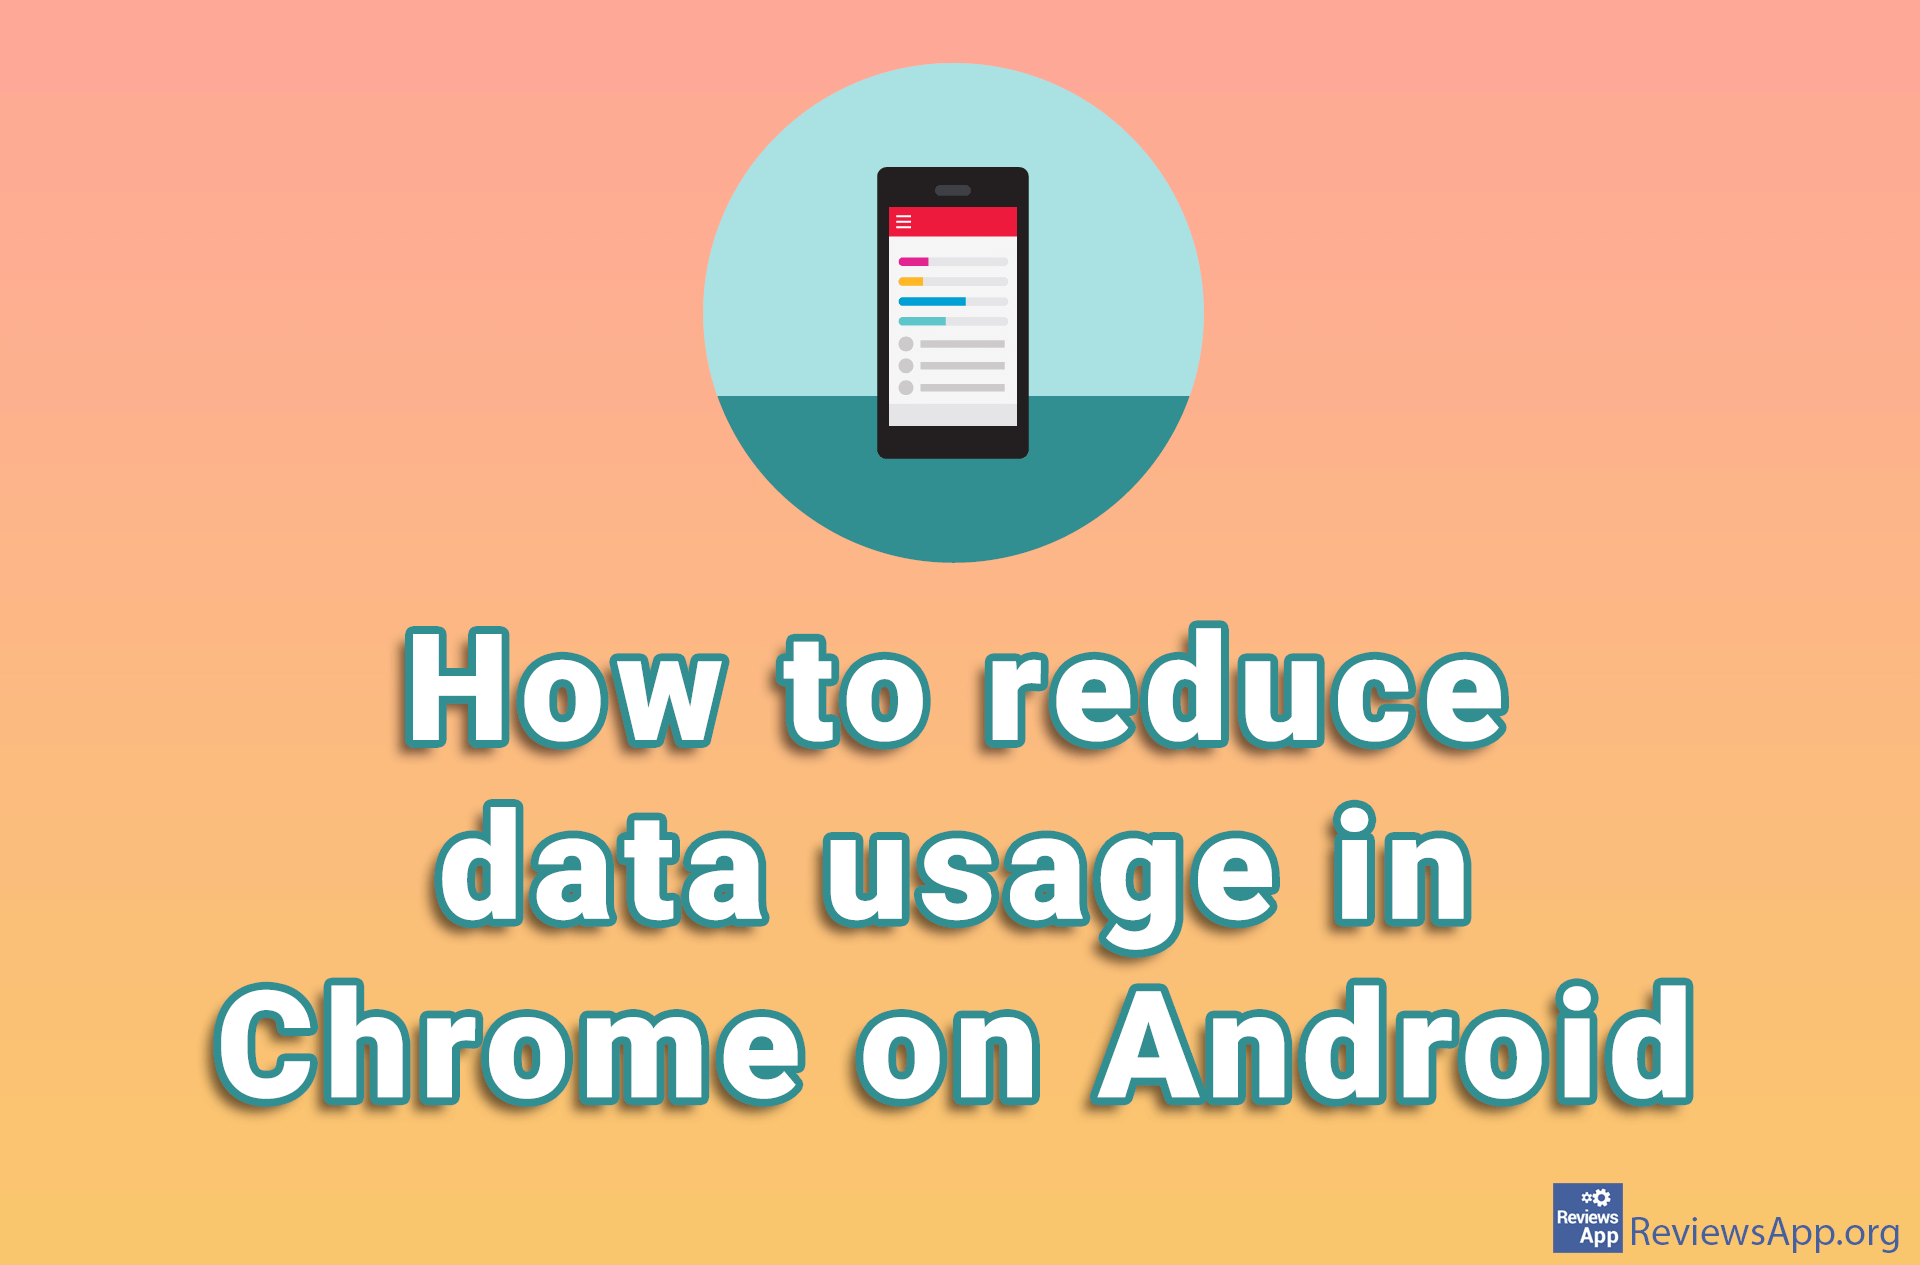 How to reduce data usage in Chrome on Android